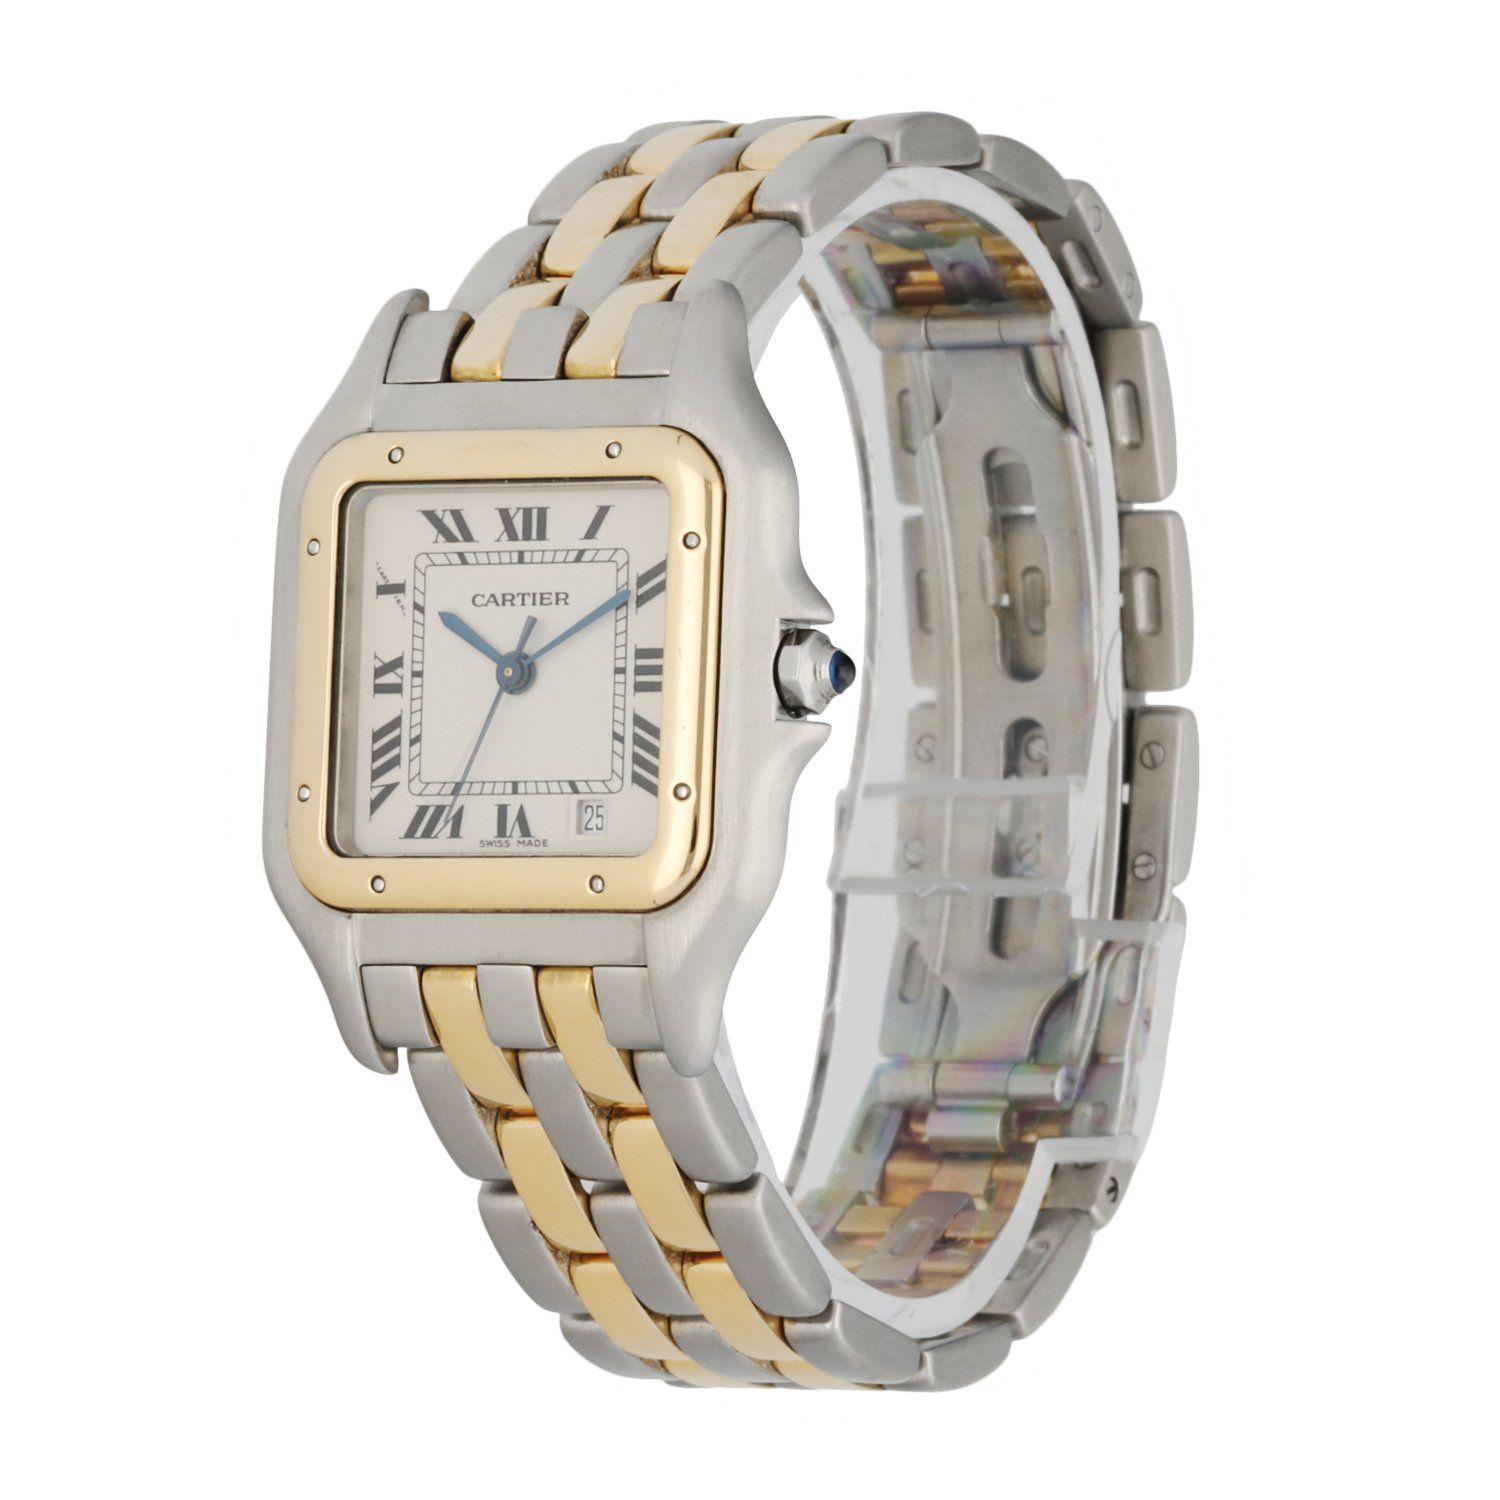 Cartier Panthere Midsize Ladies Watch. 27mm Stainless Steel case. 18K Yellow Gold Stationary bezel. Off-WhiteÂ dial with Blue steel hands and Roman numeral hour markers. Minute markers on the inner dial. Date display at the 5 o'clock position.